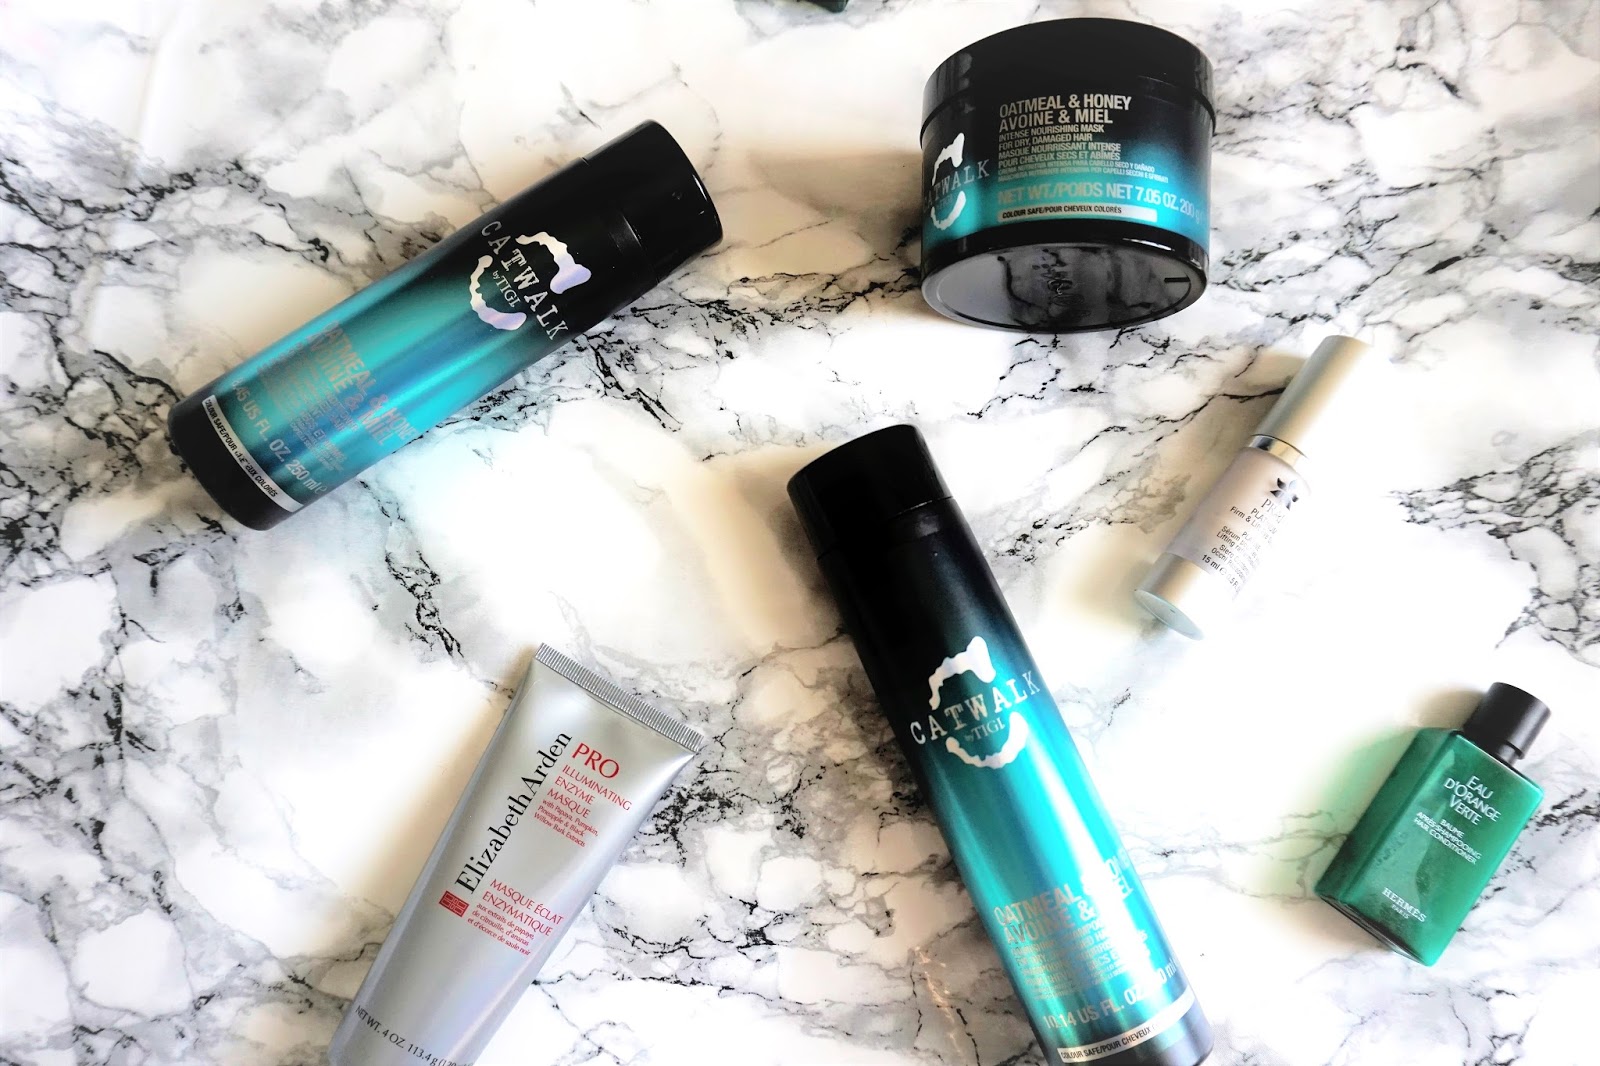 Catwalk By Tigi Oatmeal And Honey Haircare Review My New Favourites The Skin And Beauty Blog